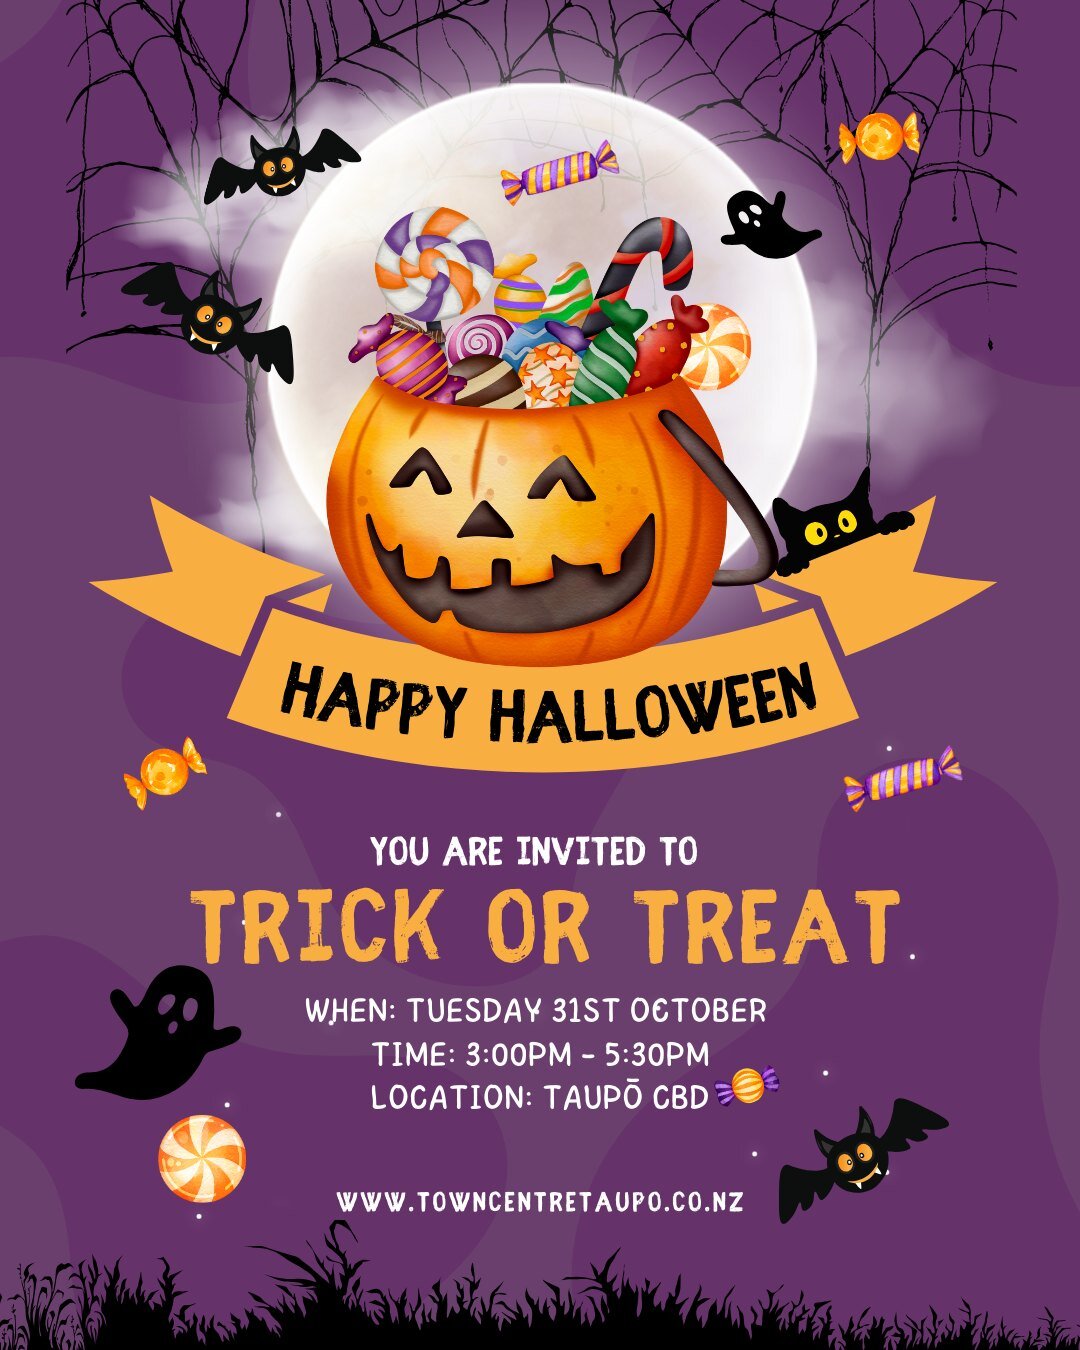 🎃 Boo! Get ready for some Halloween fun at Towncentre Taupō! 🌟 Join us for trick-or-treating on Tuesday, 31st October from 3:00pm to 5:30pm. 🍭👻 Put on your coolest costume and come have a magical time in Taupō CBD! Can't wait to see all the littl